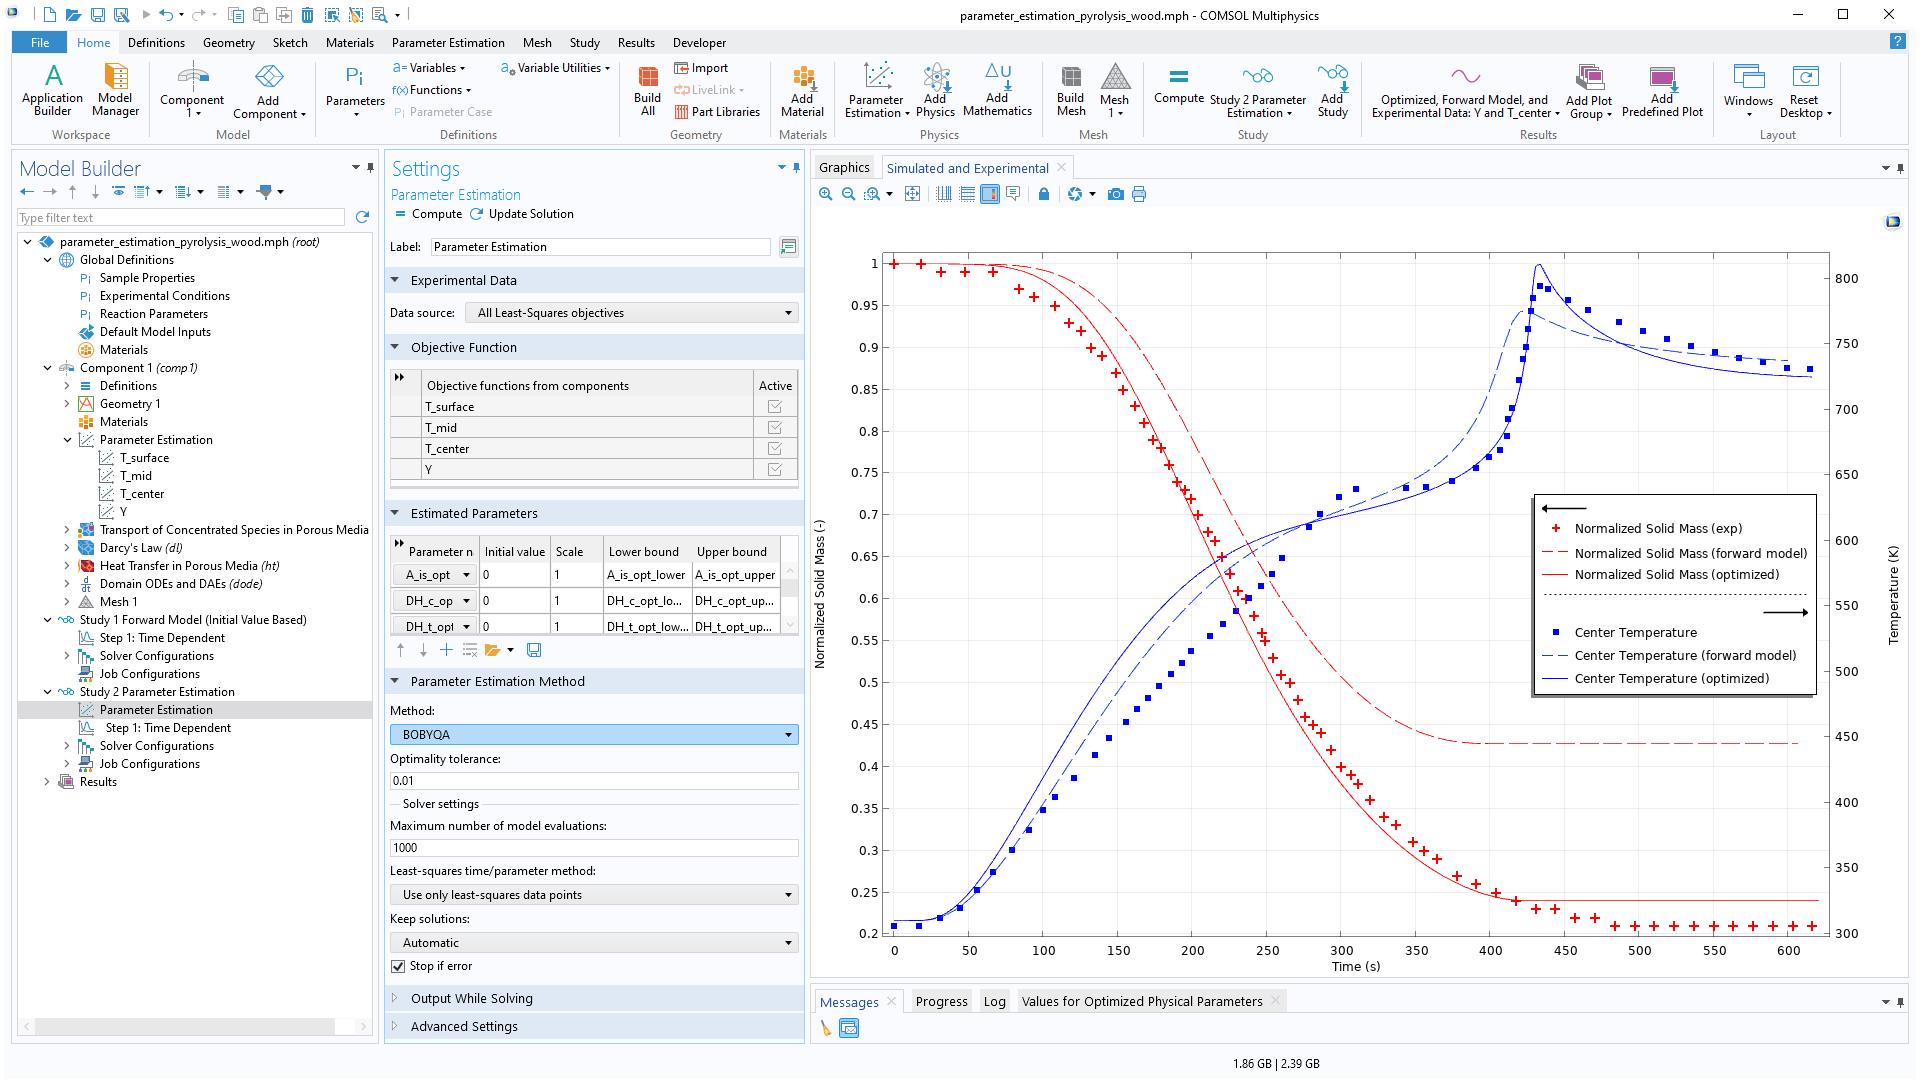 The COMSOL Multiphysics UI showing the Model Builder with the Parameter Estimation node highlighted, the corresponding Settings window, and a 1D plot in the Graphics window.